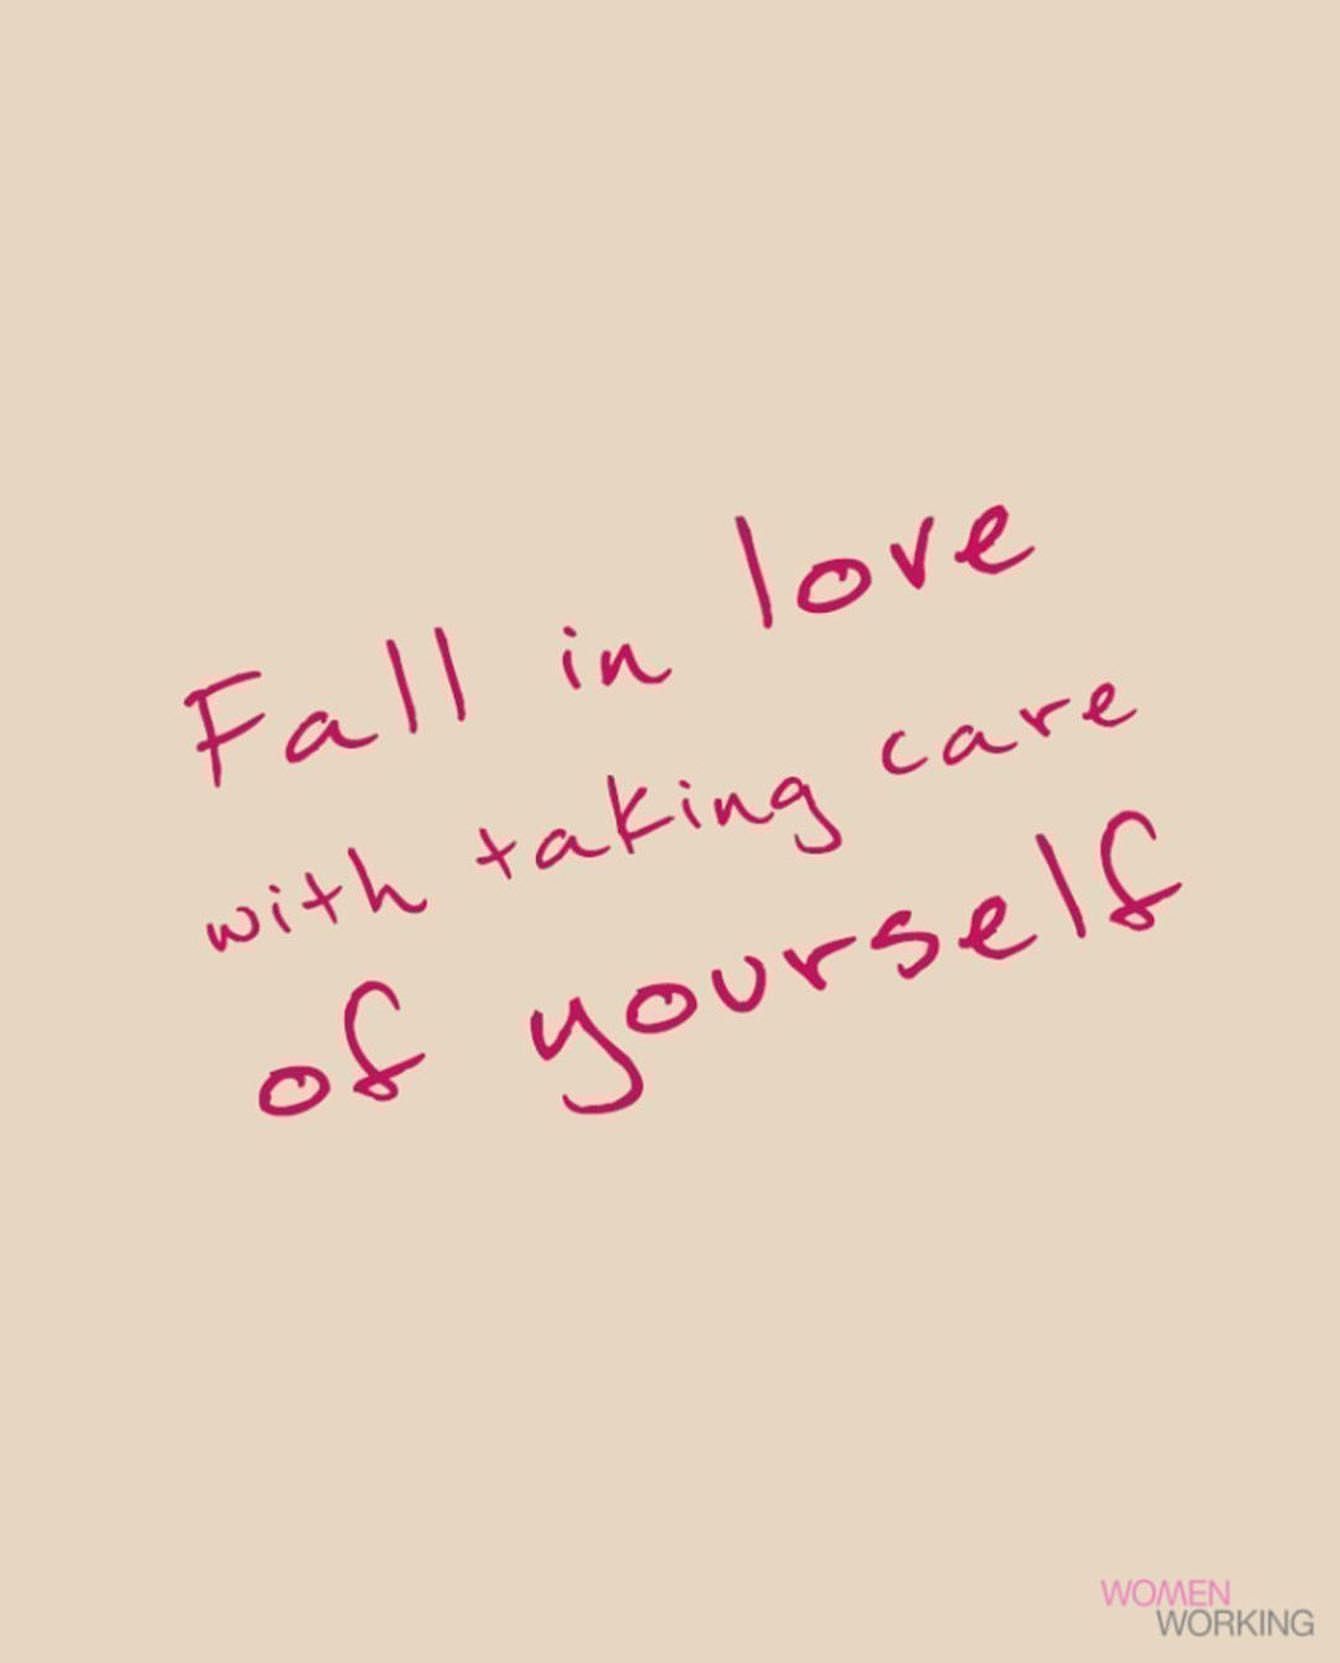 Fall in love with taking care of yourself.